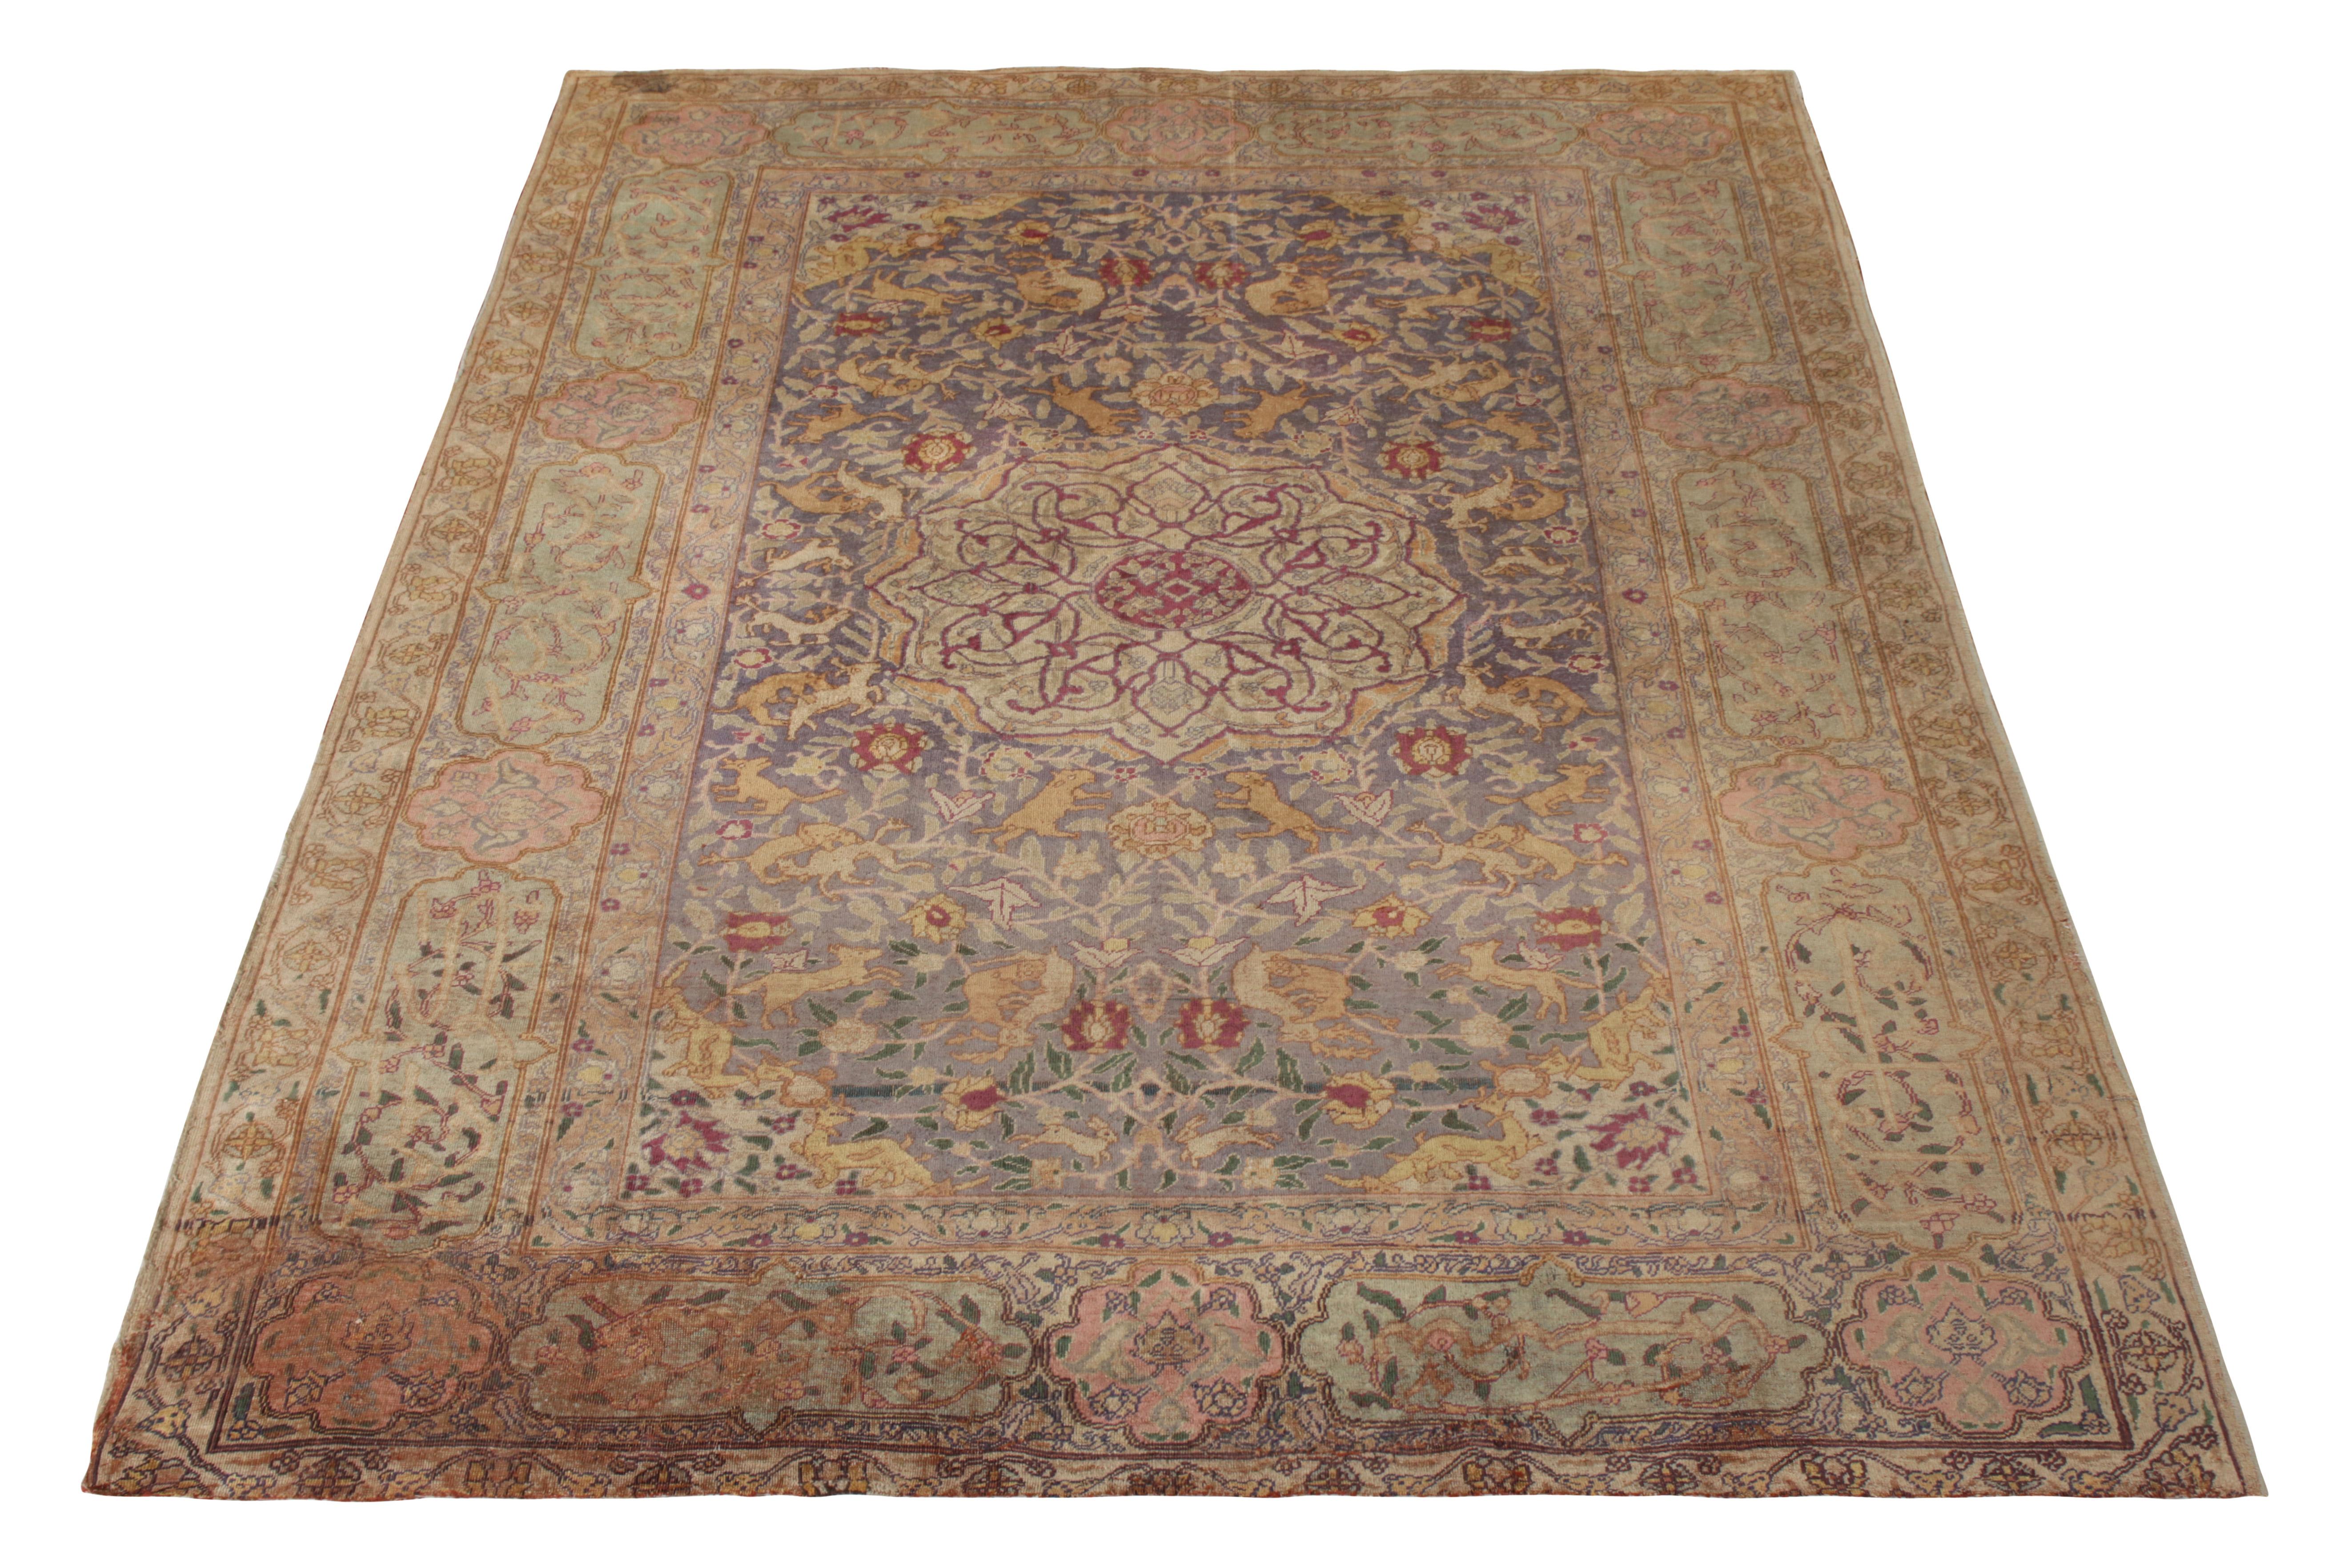 A 4x6 antique rug connoting a rare Kayseri design, hand knotted in all silk originating from Turkey circa 1920-1930. Enjoying a unique pallet including prevalent green and gold hues, as well as uncommon pictorial references. 

On the design: The